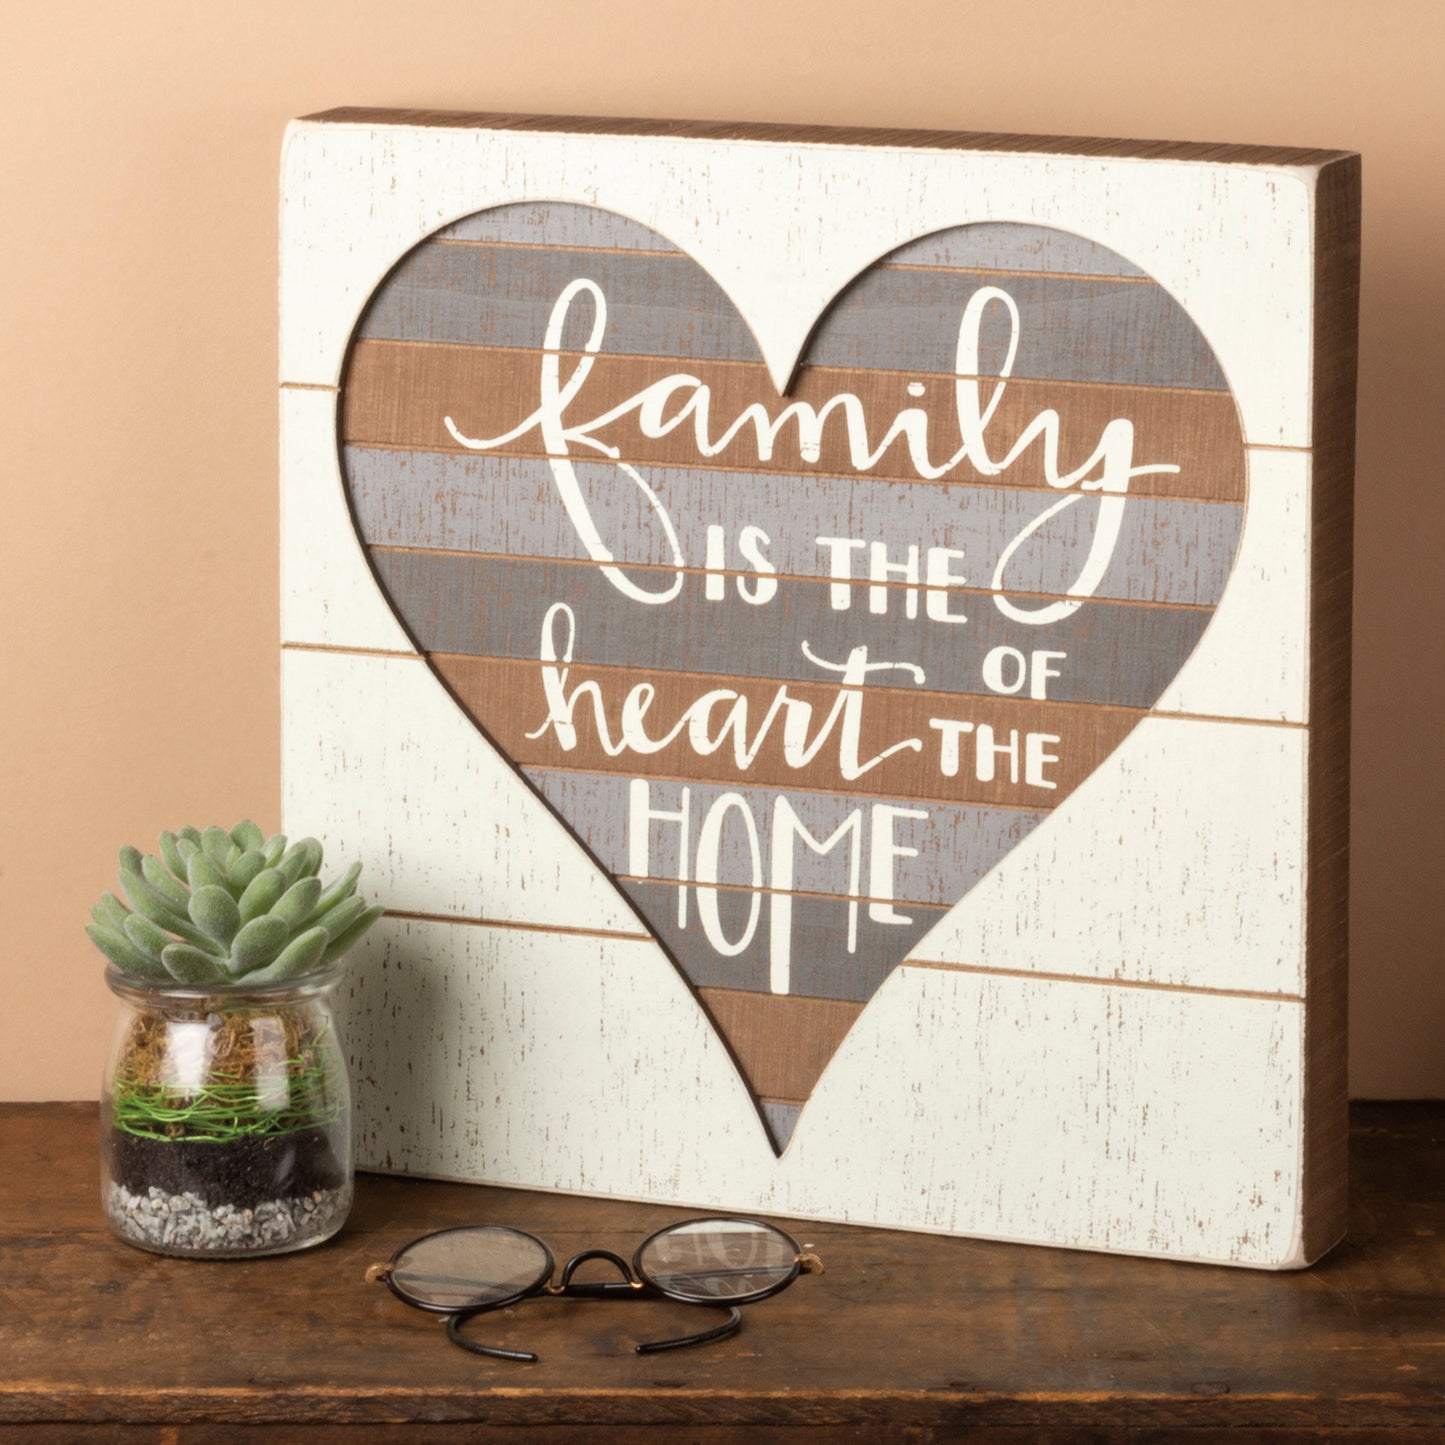 "Family is the heart of the home" - Slat Box Sign